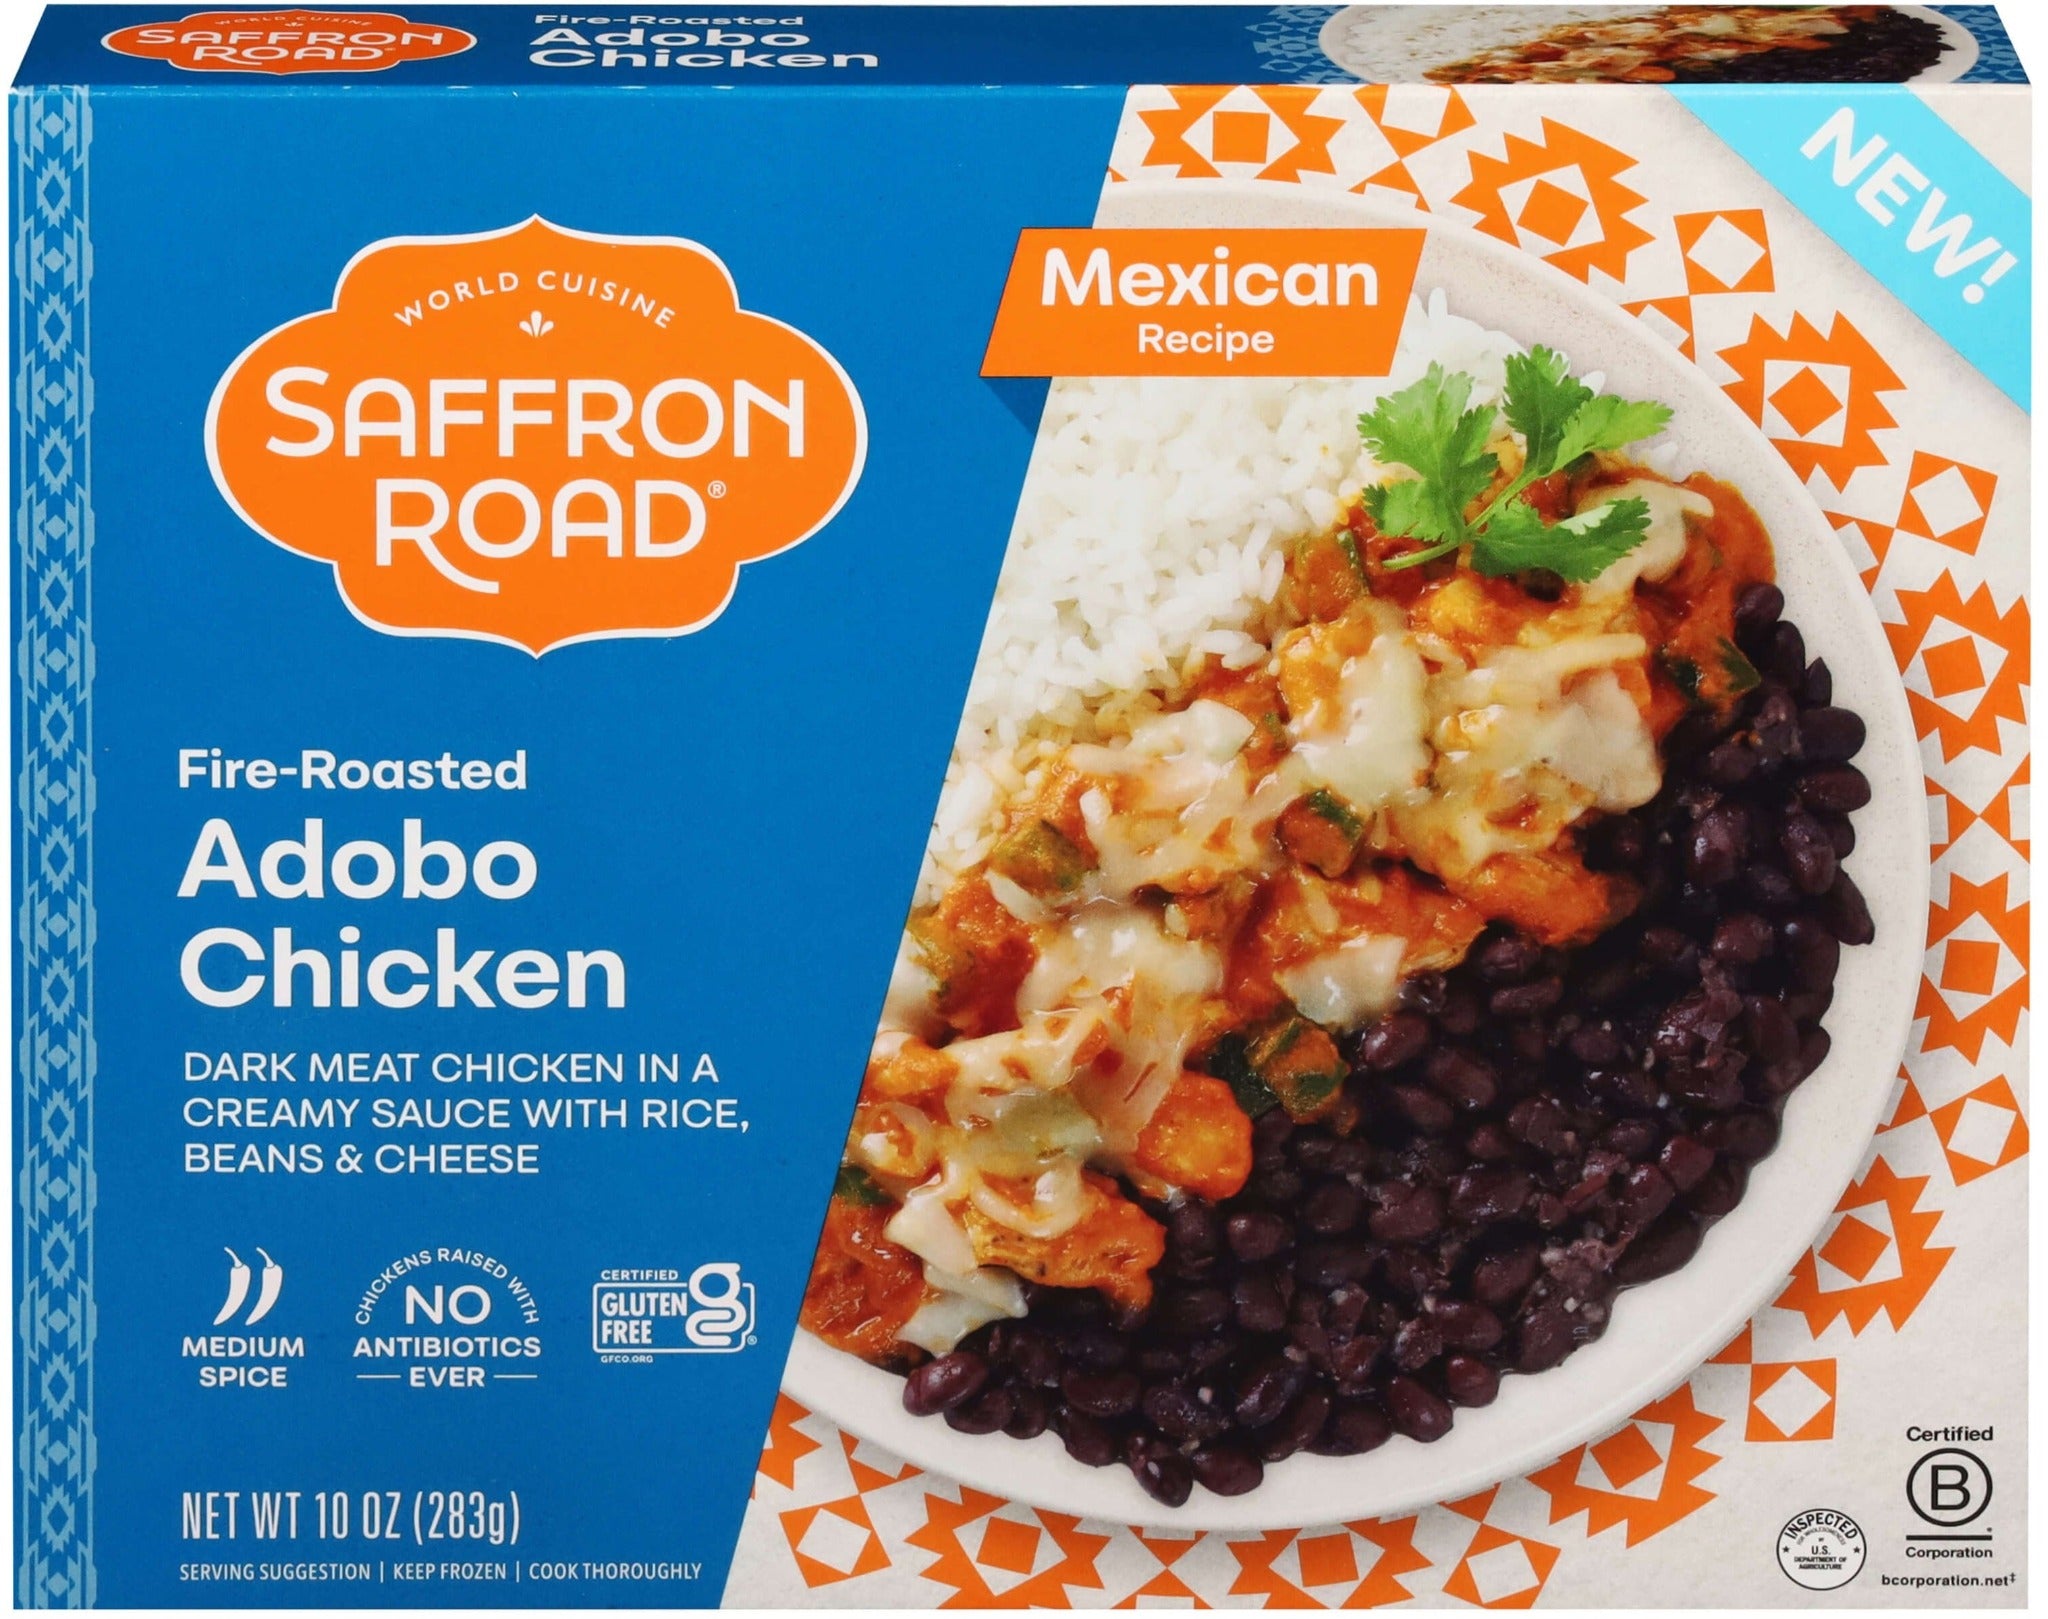 Front of Saffron Road Fire-Roasted Adobo Chicken package. Mexican recipe with dark meat chicken, rice, beans, and cheese. Medium spice, gluten-free, no antibiotics.